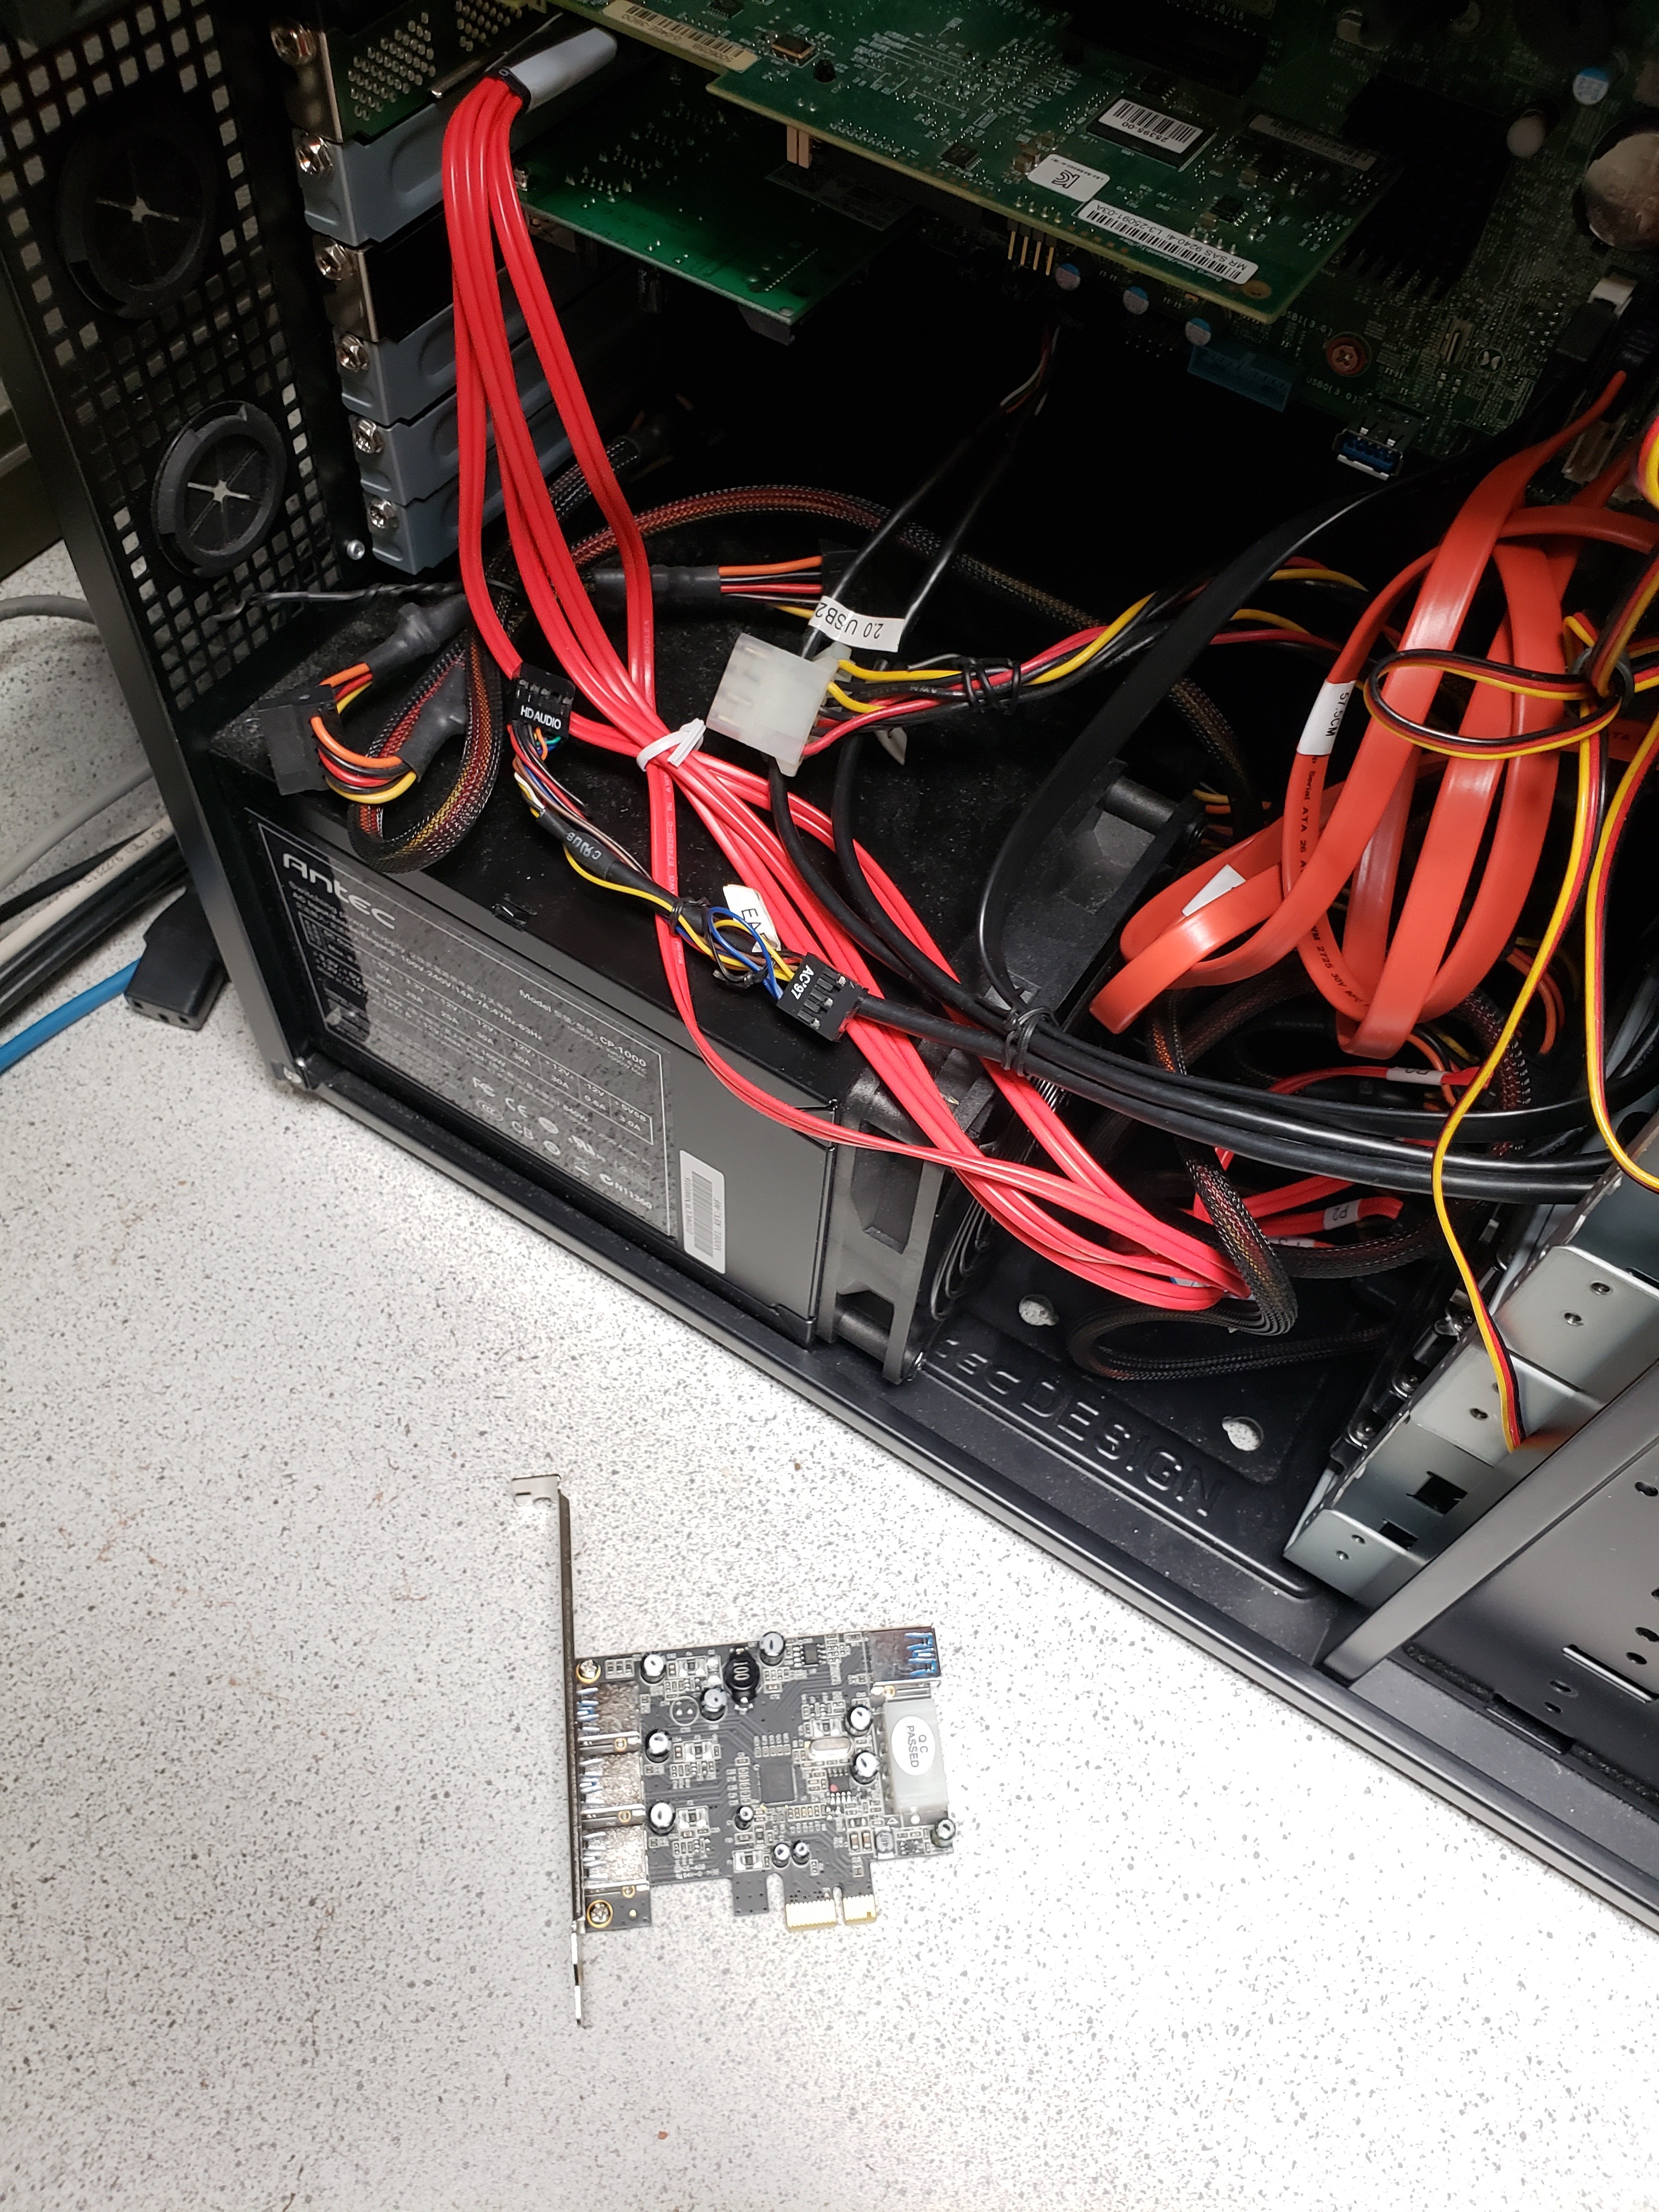 power supply of file server